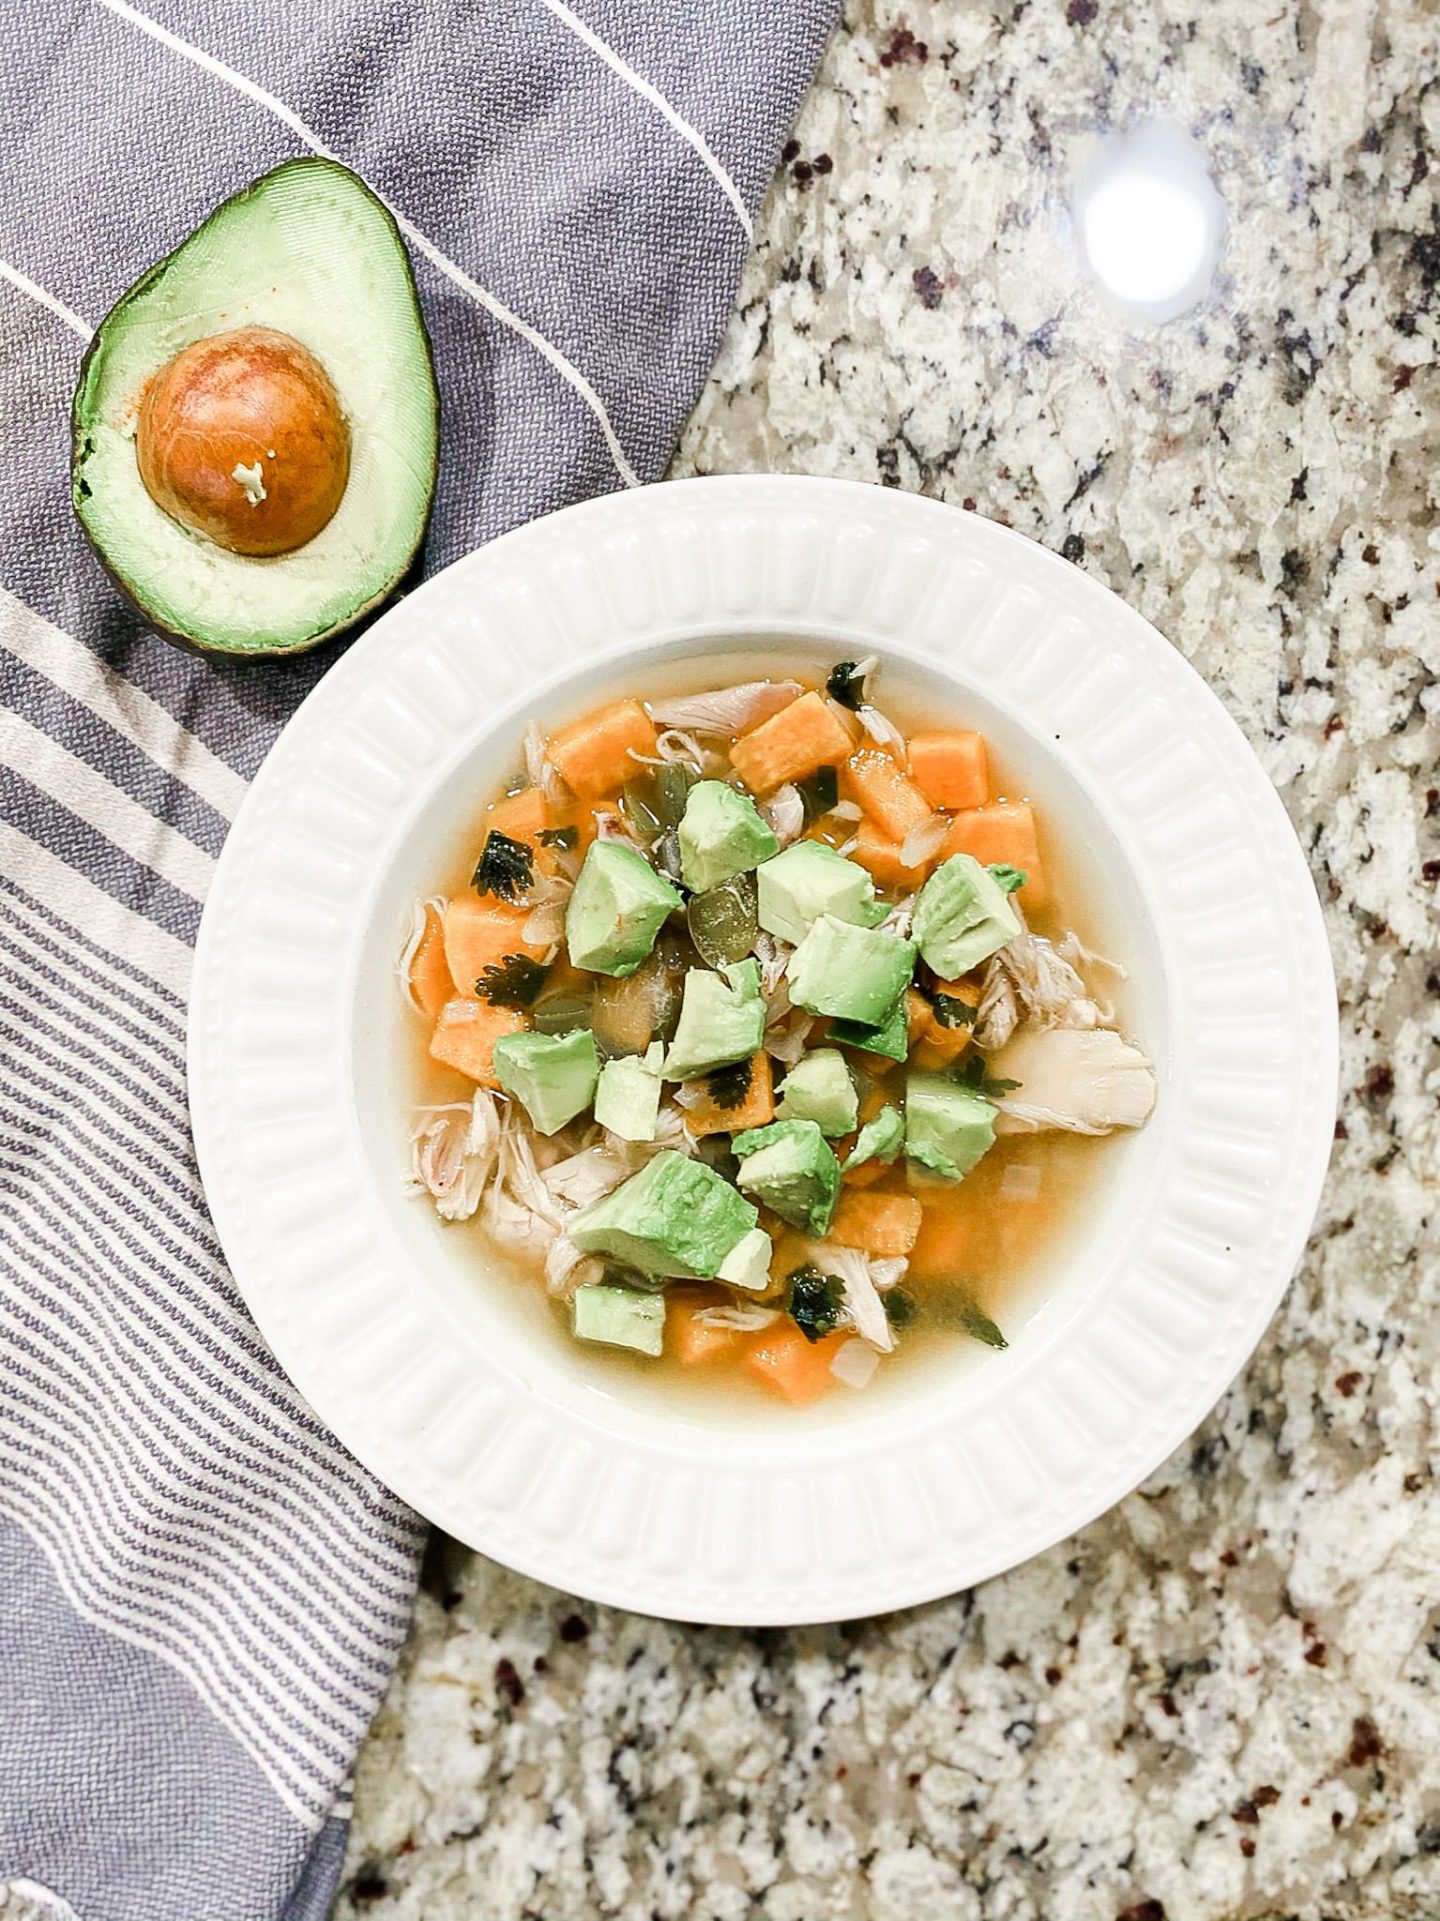 Whole30 White Chicken Chili Recipe (Paleo) by Alabama Food + Health blogger, Heather Brown // My Life Well Loved